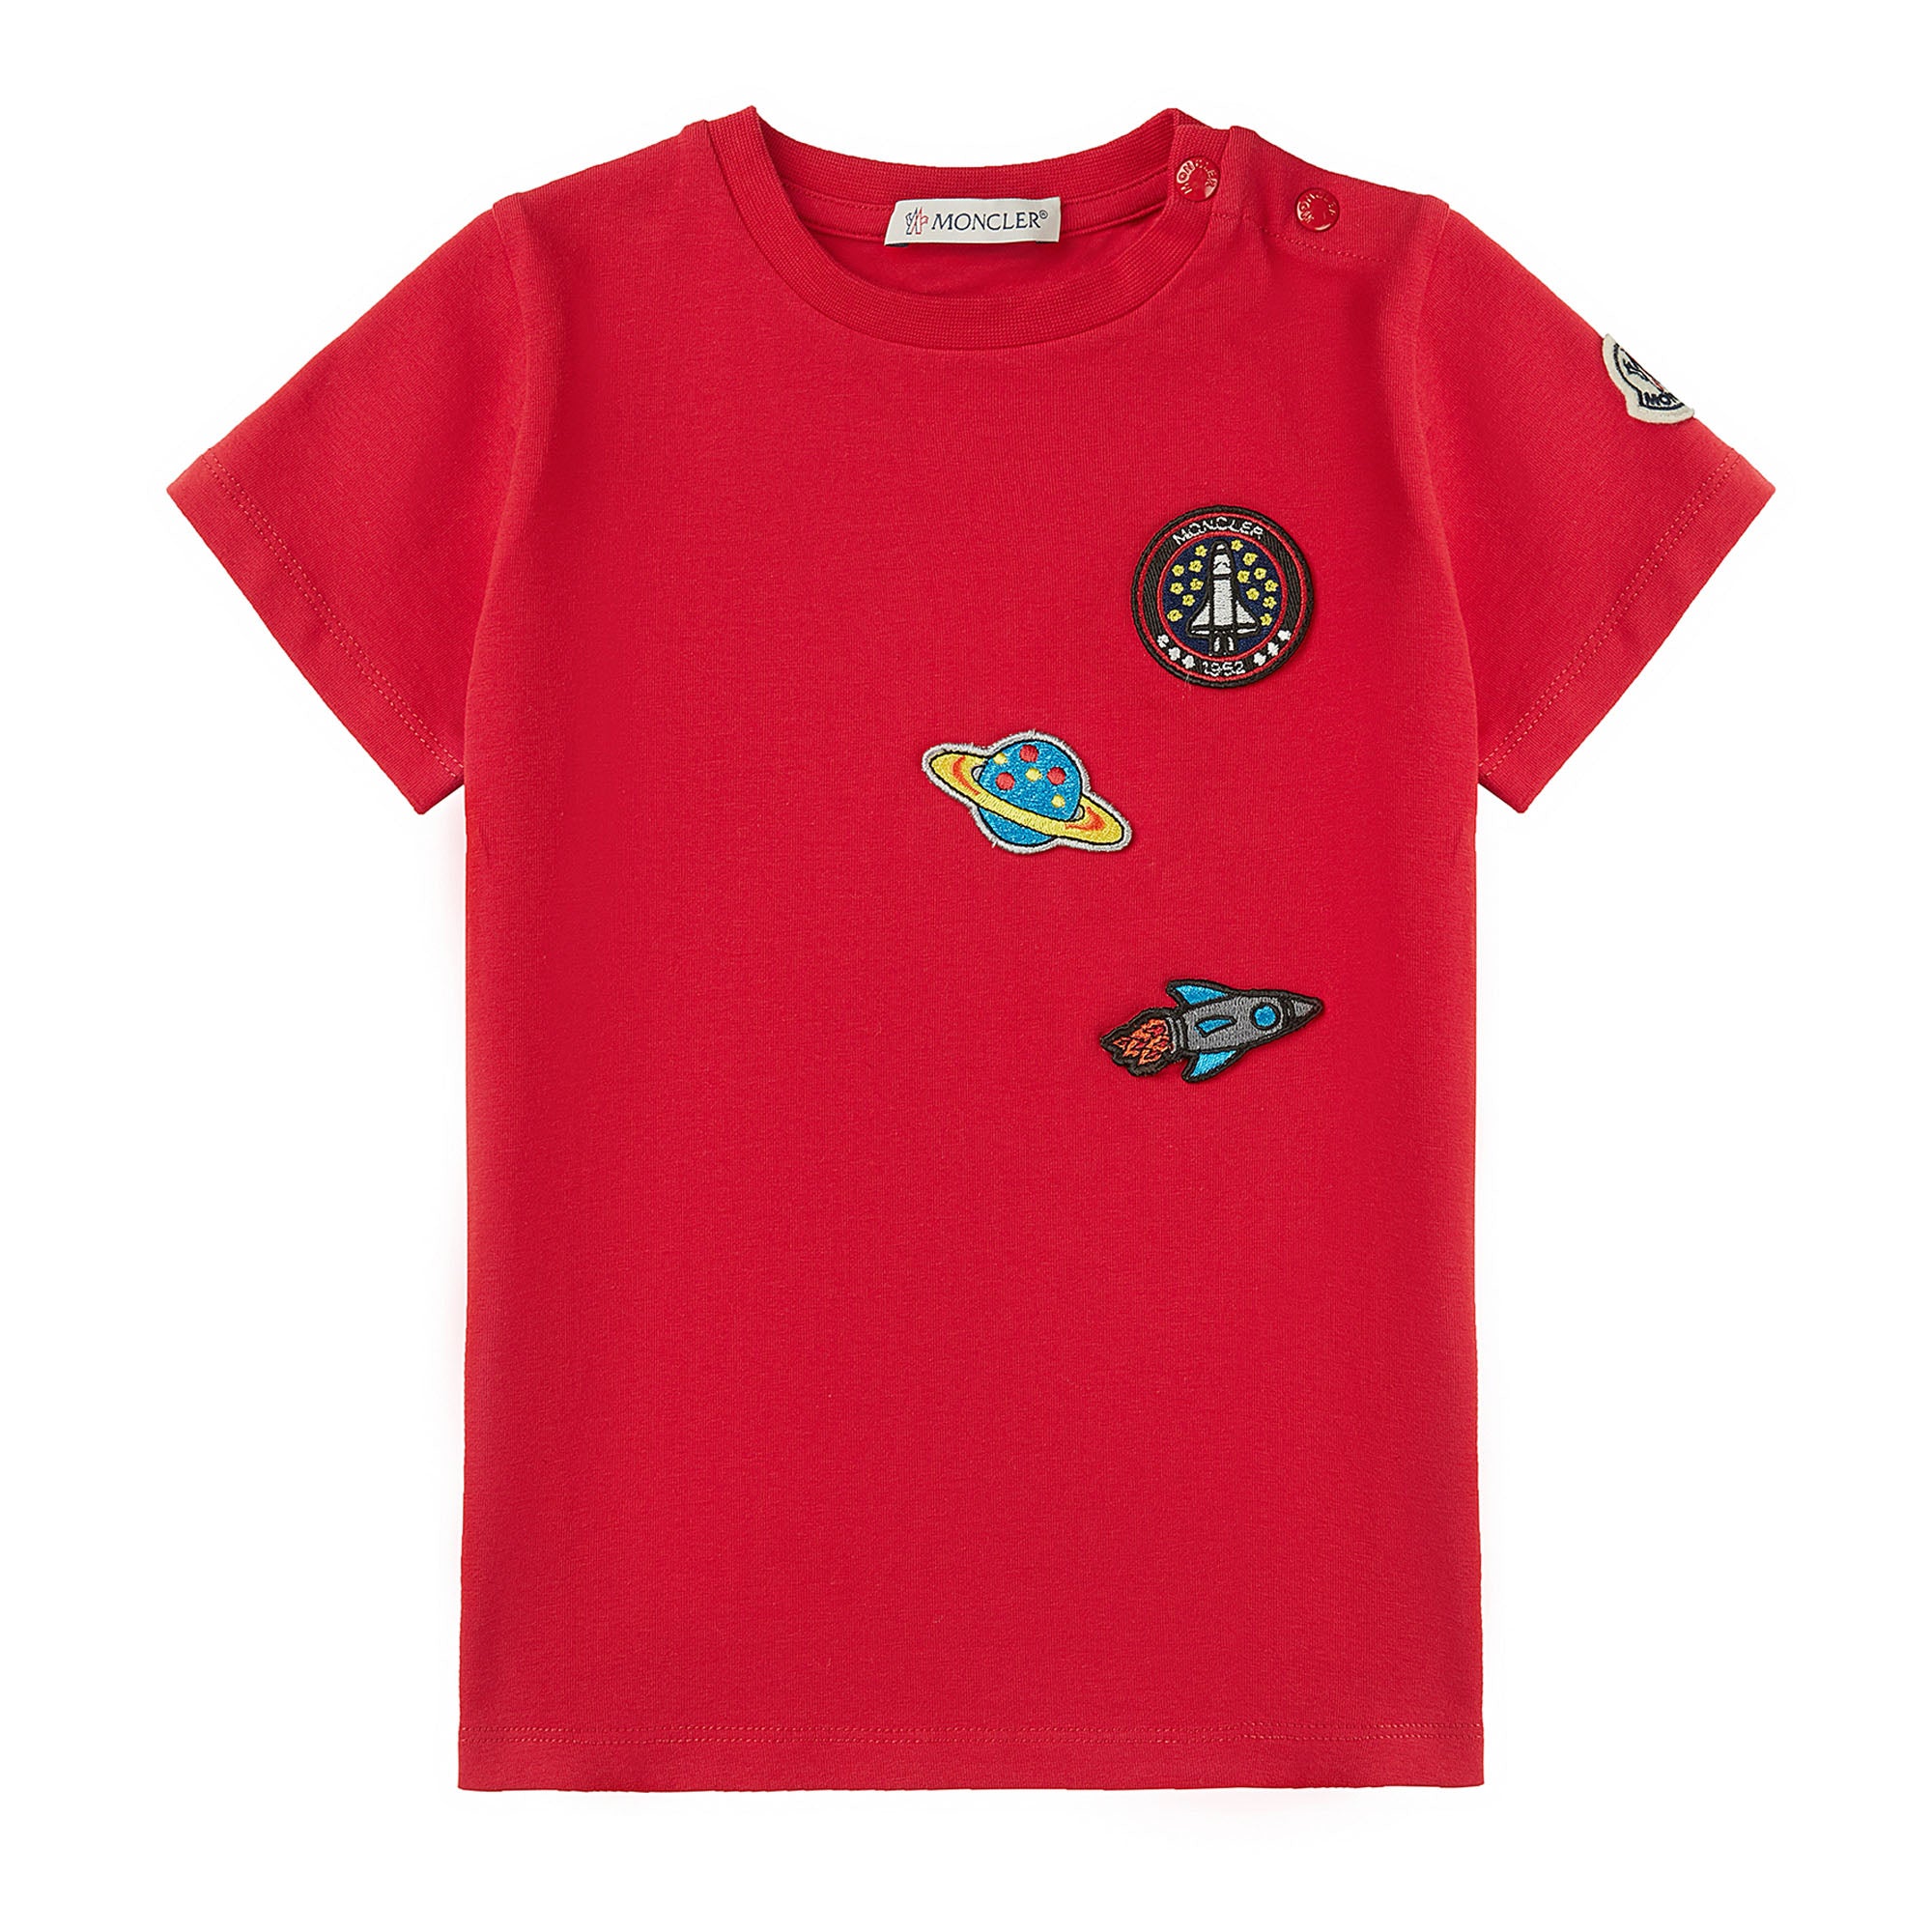 Baby Boys Red Cotton T-shirt